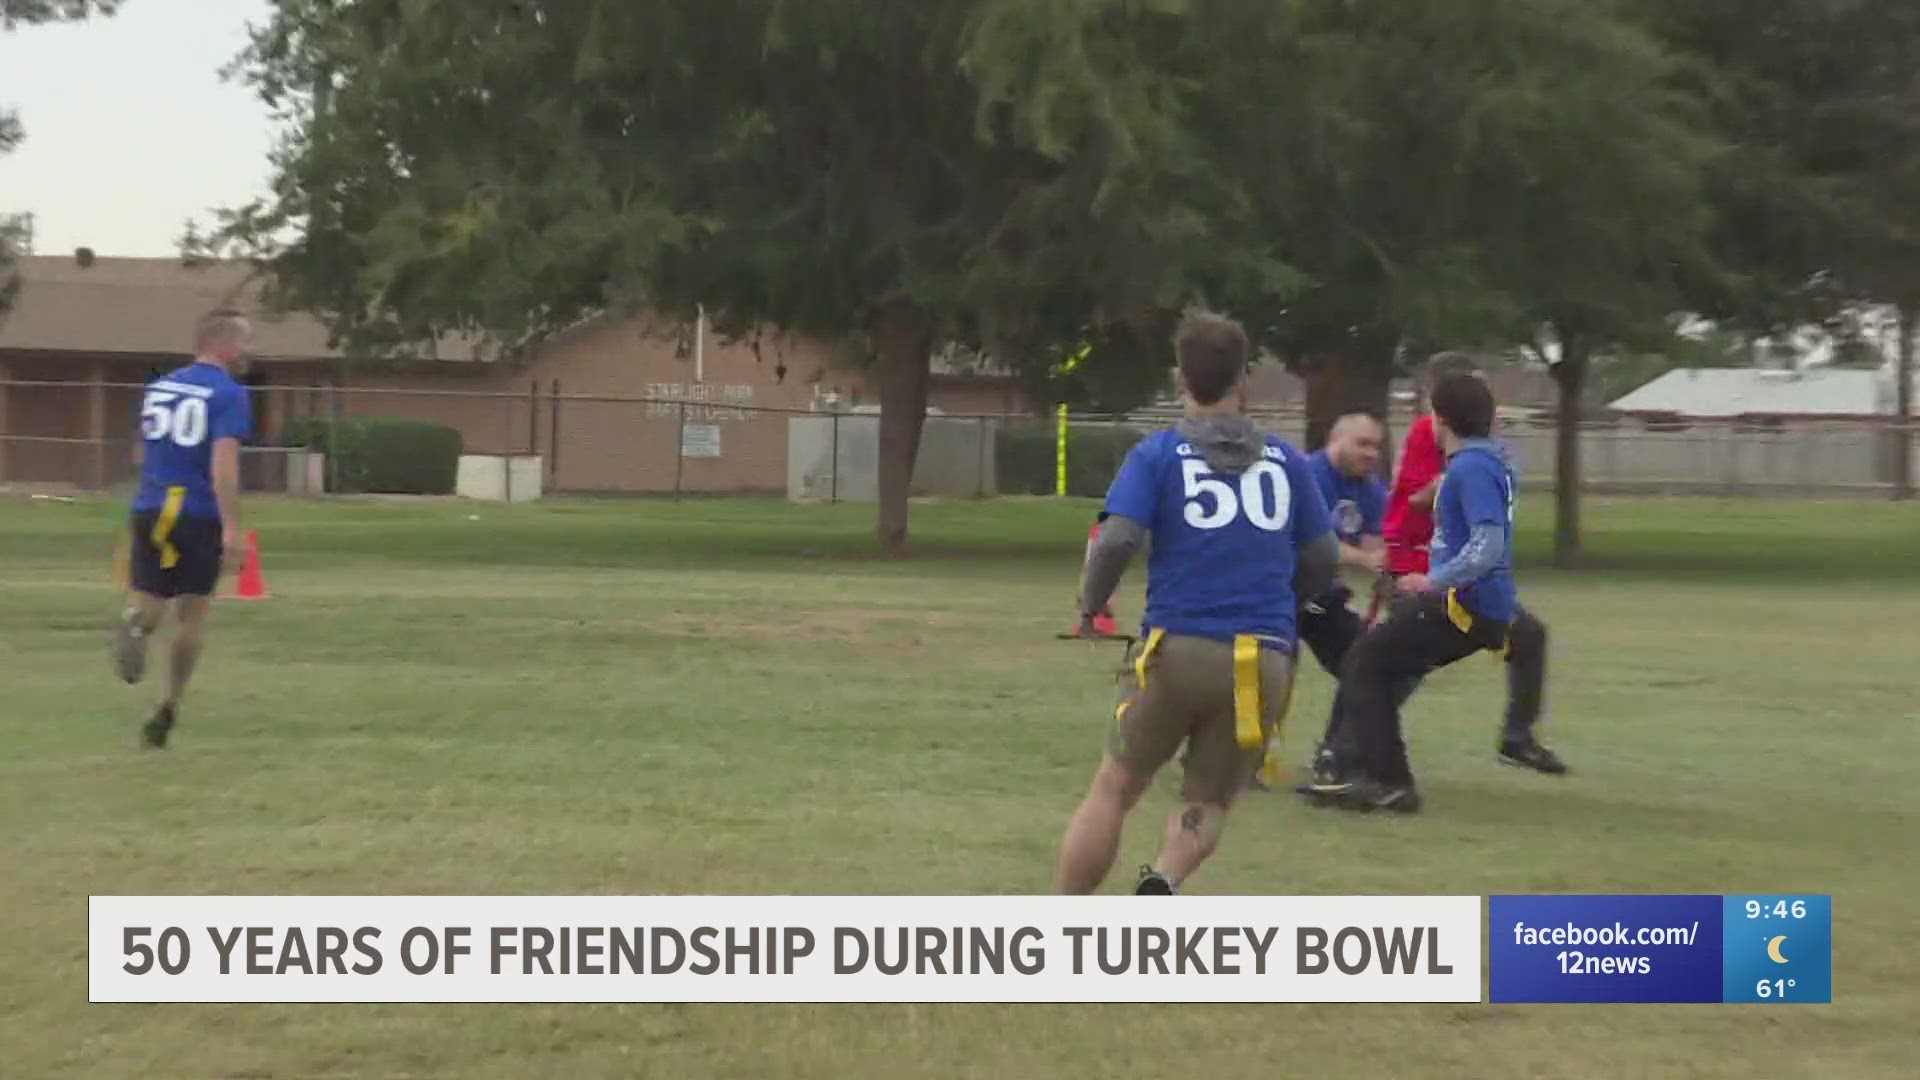 Two families came together to play a friendly game of touch football to celebrate Thanksgiving, just as they have since 1974.